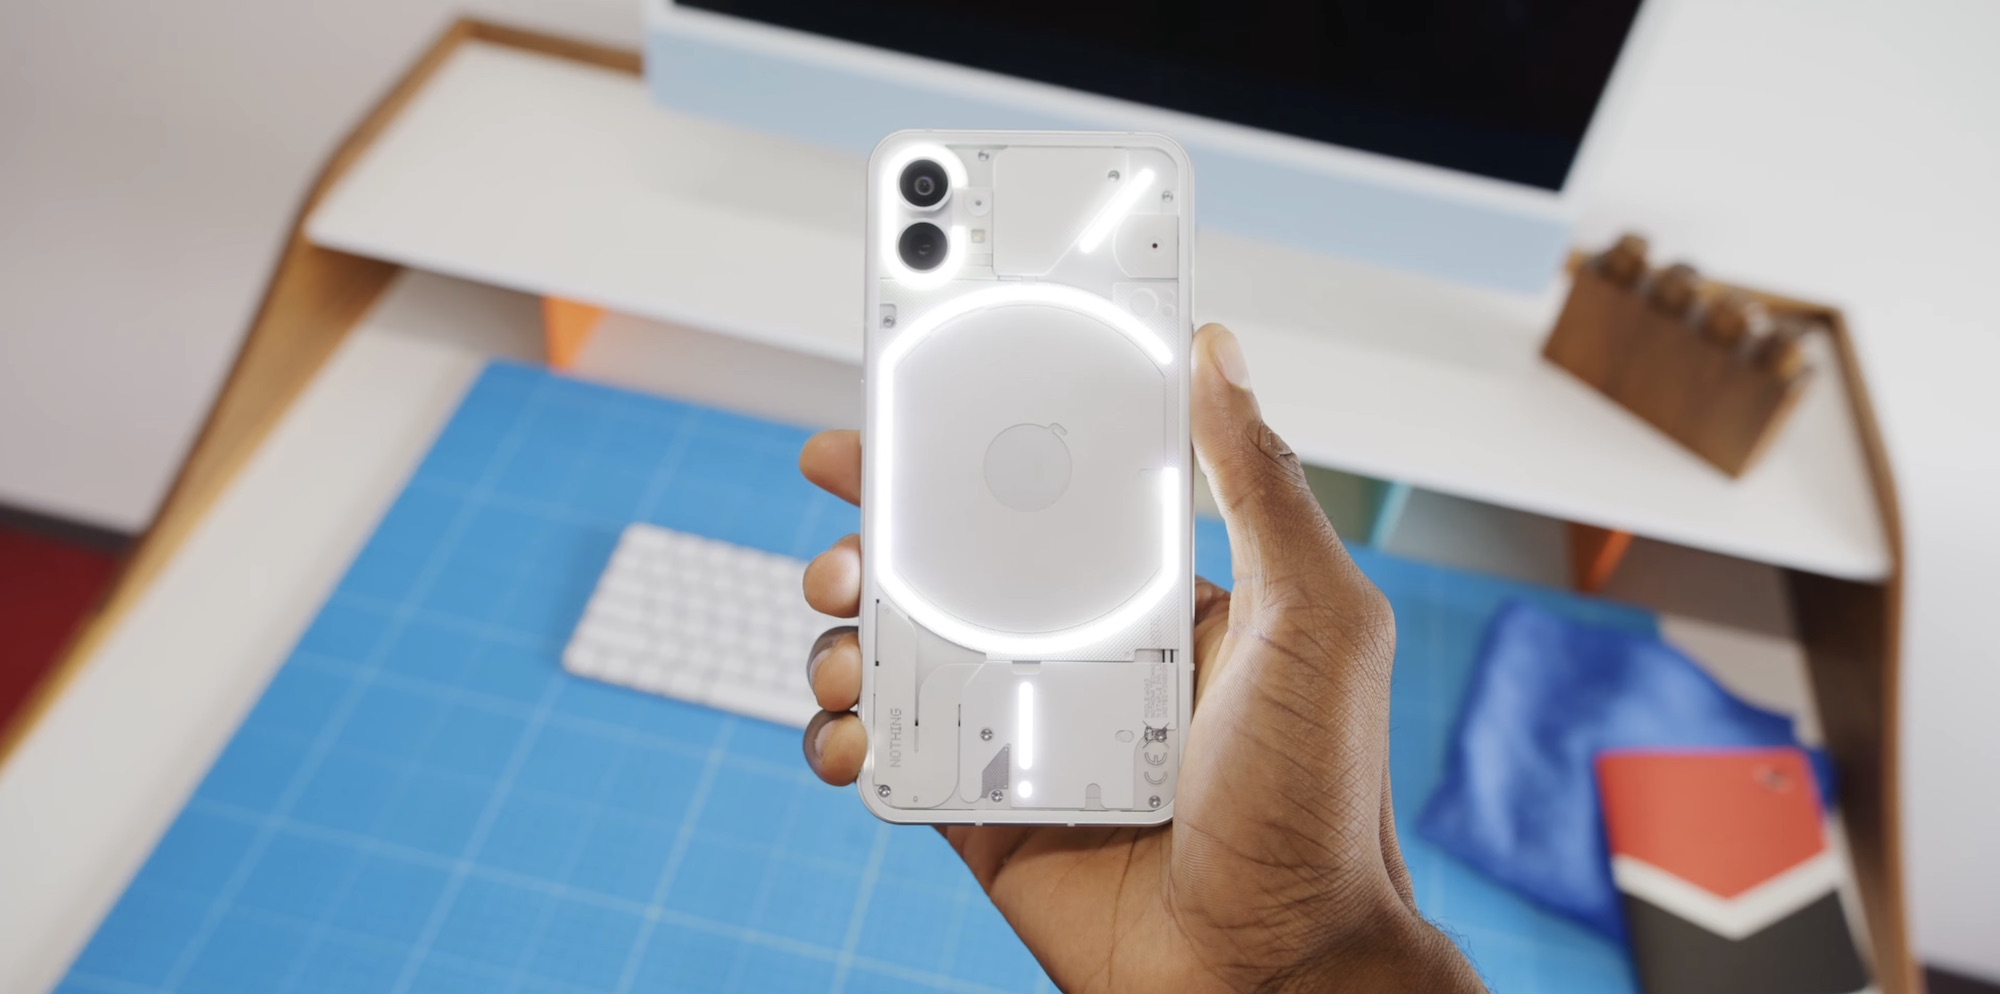 The iPhone loses prominence to its competitors in the MKBHD Smartphone Awards 2022